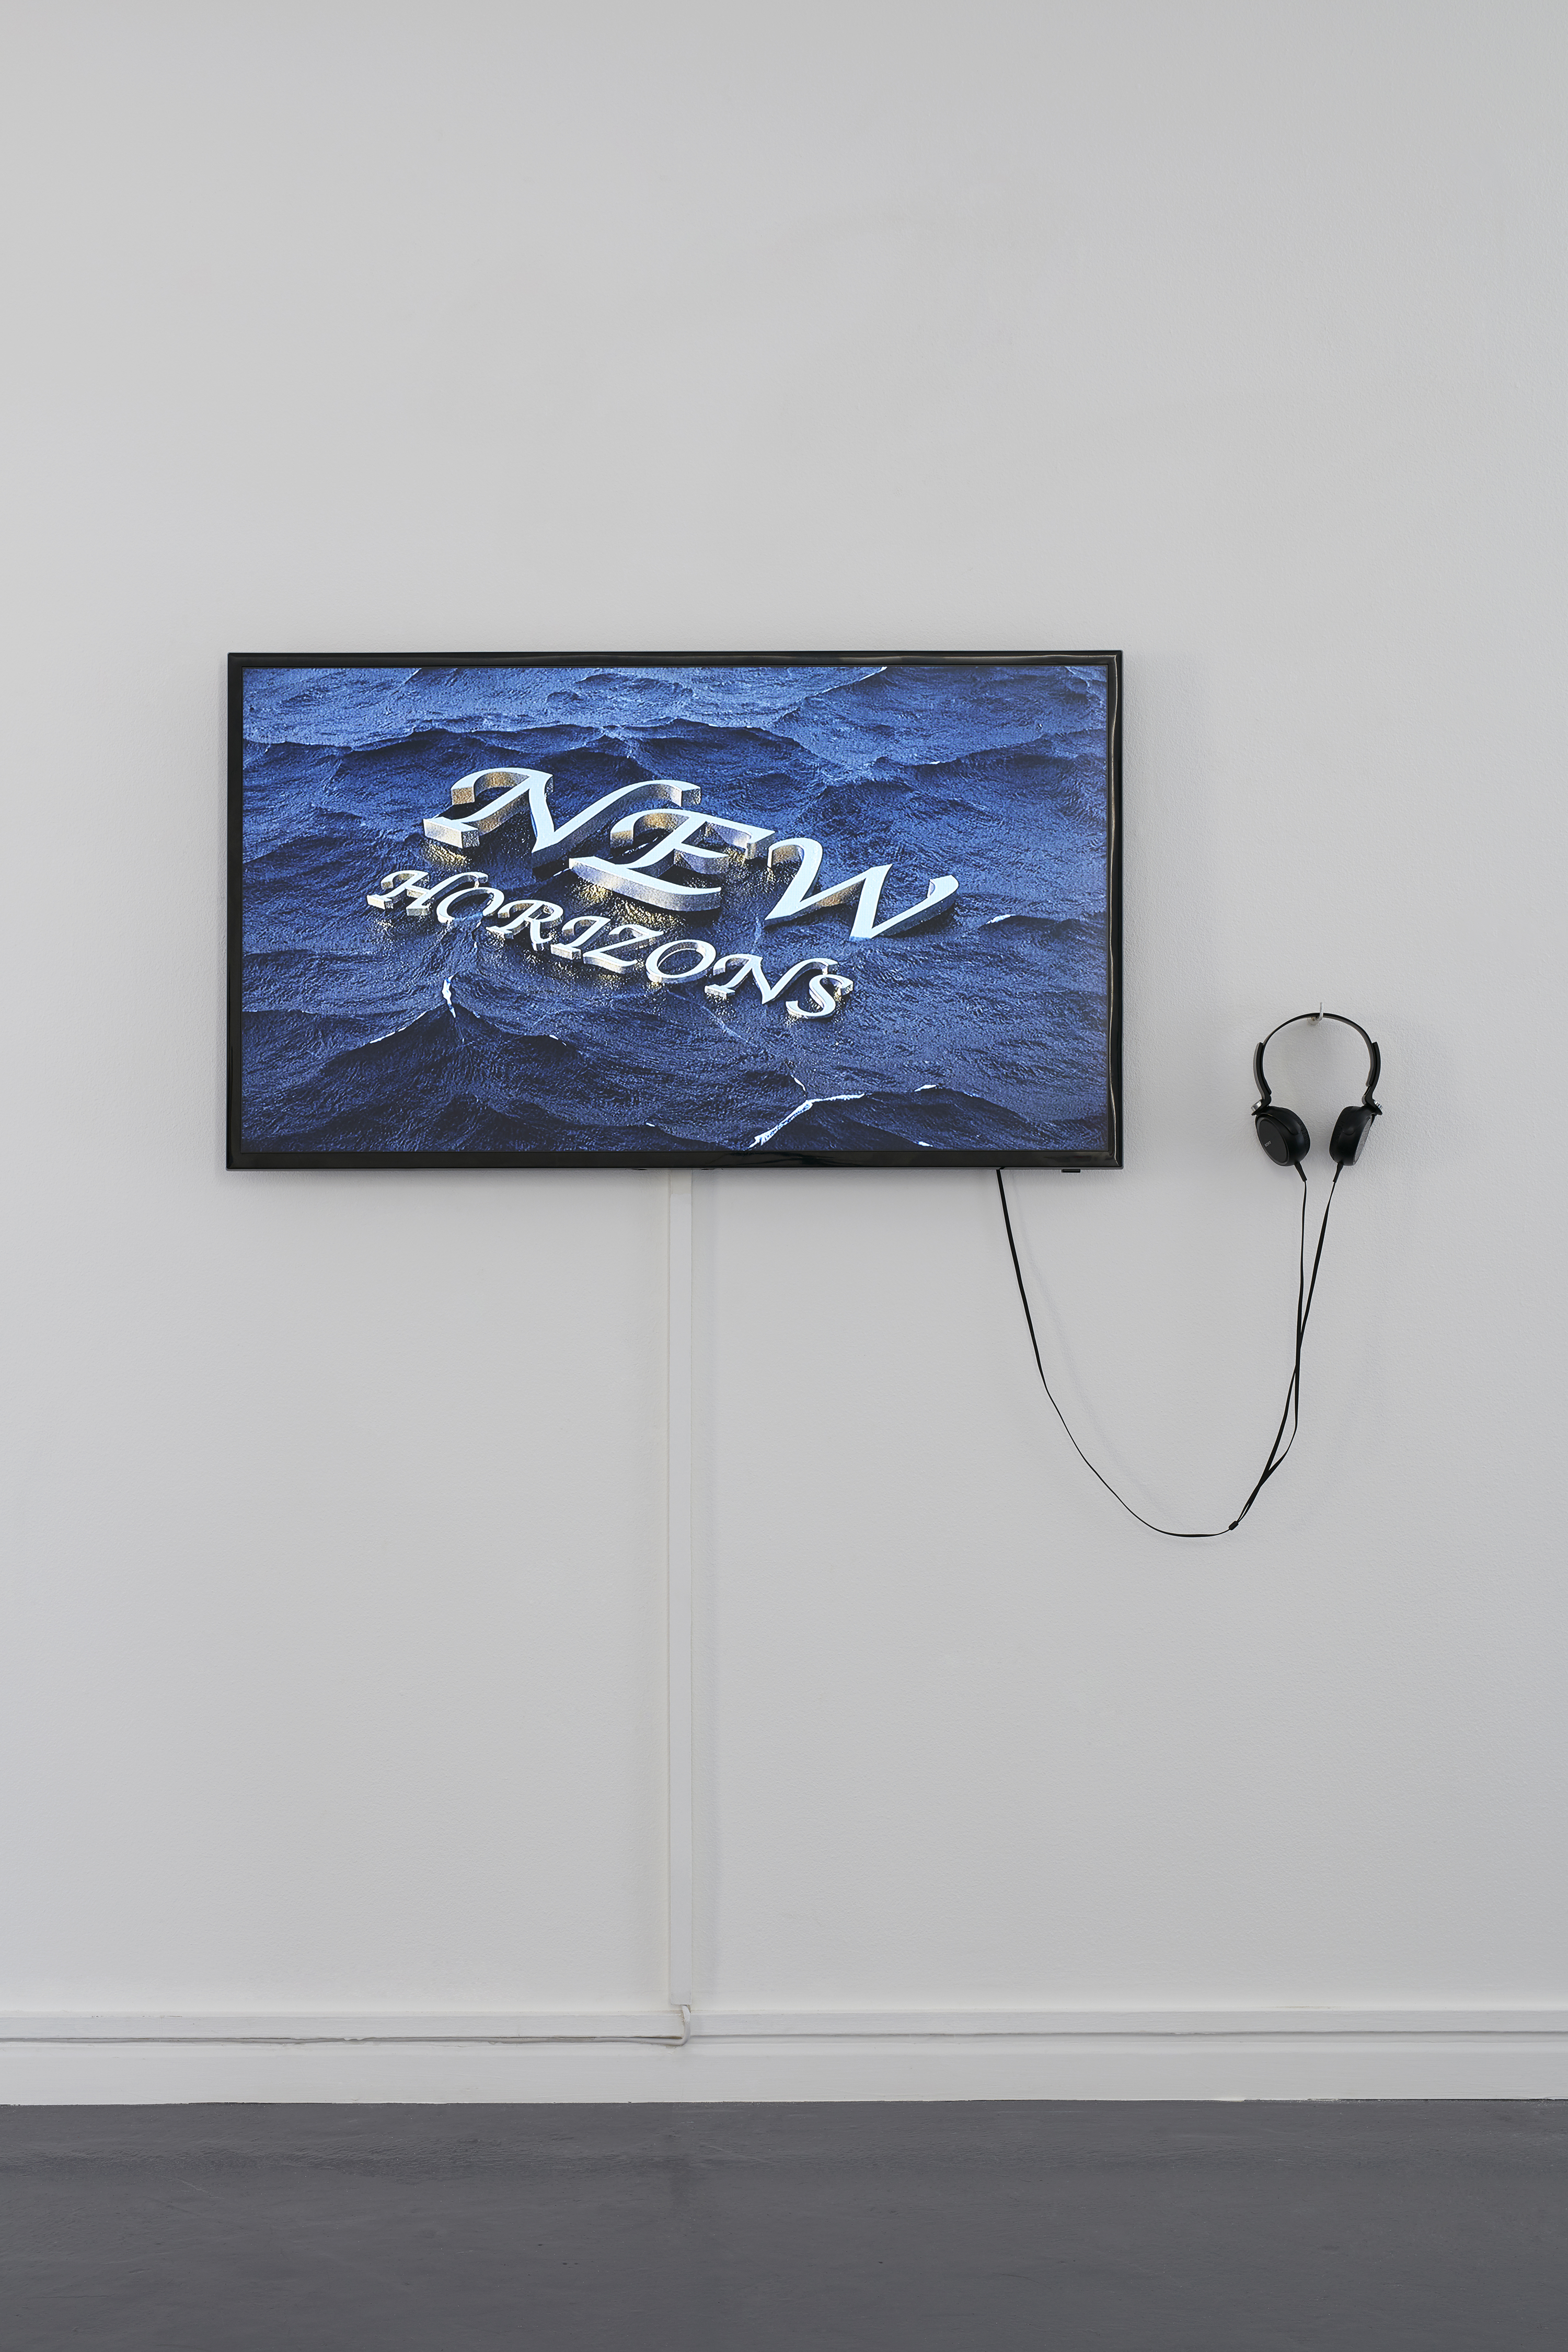 Installation view of Music on hold